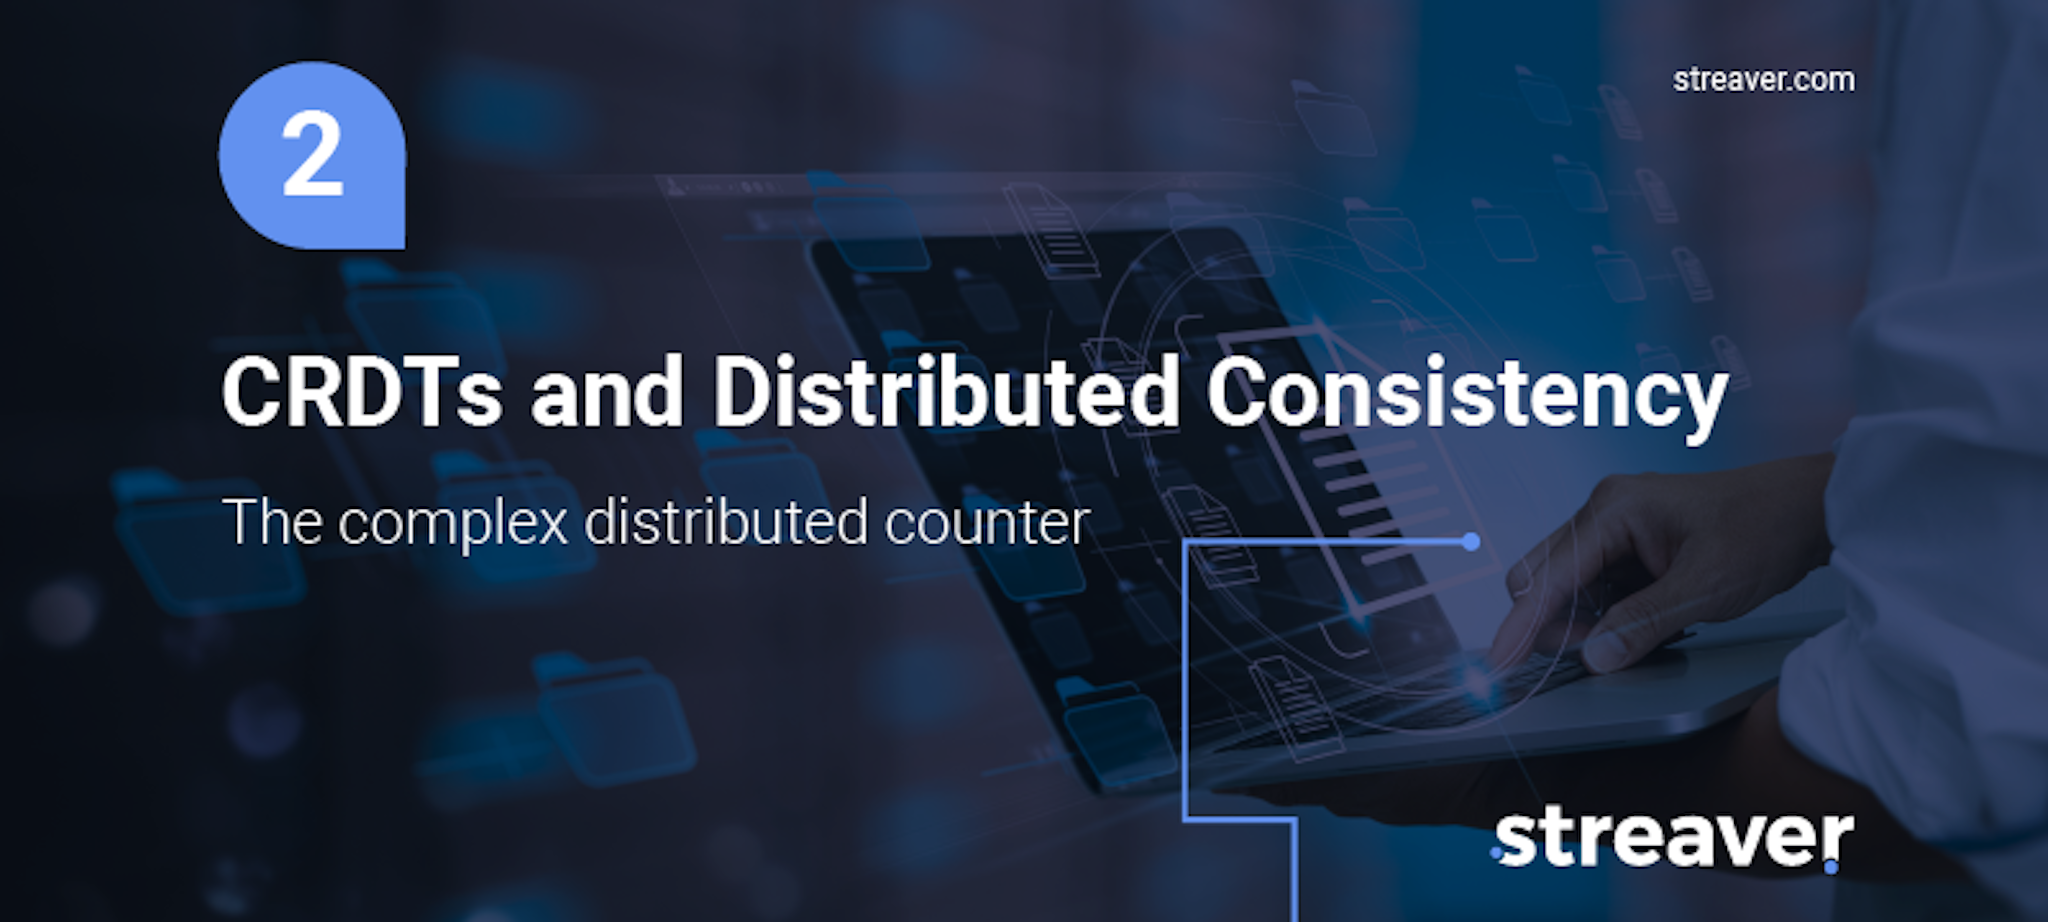 CRDTs and Distributed Consistency - The complex distributed counter